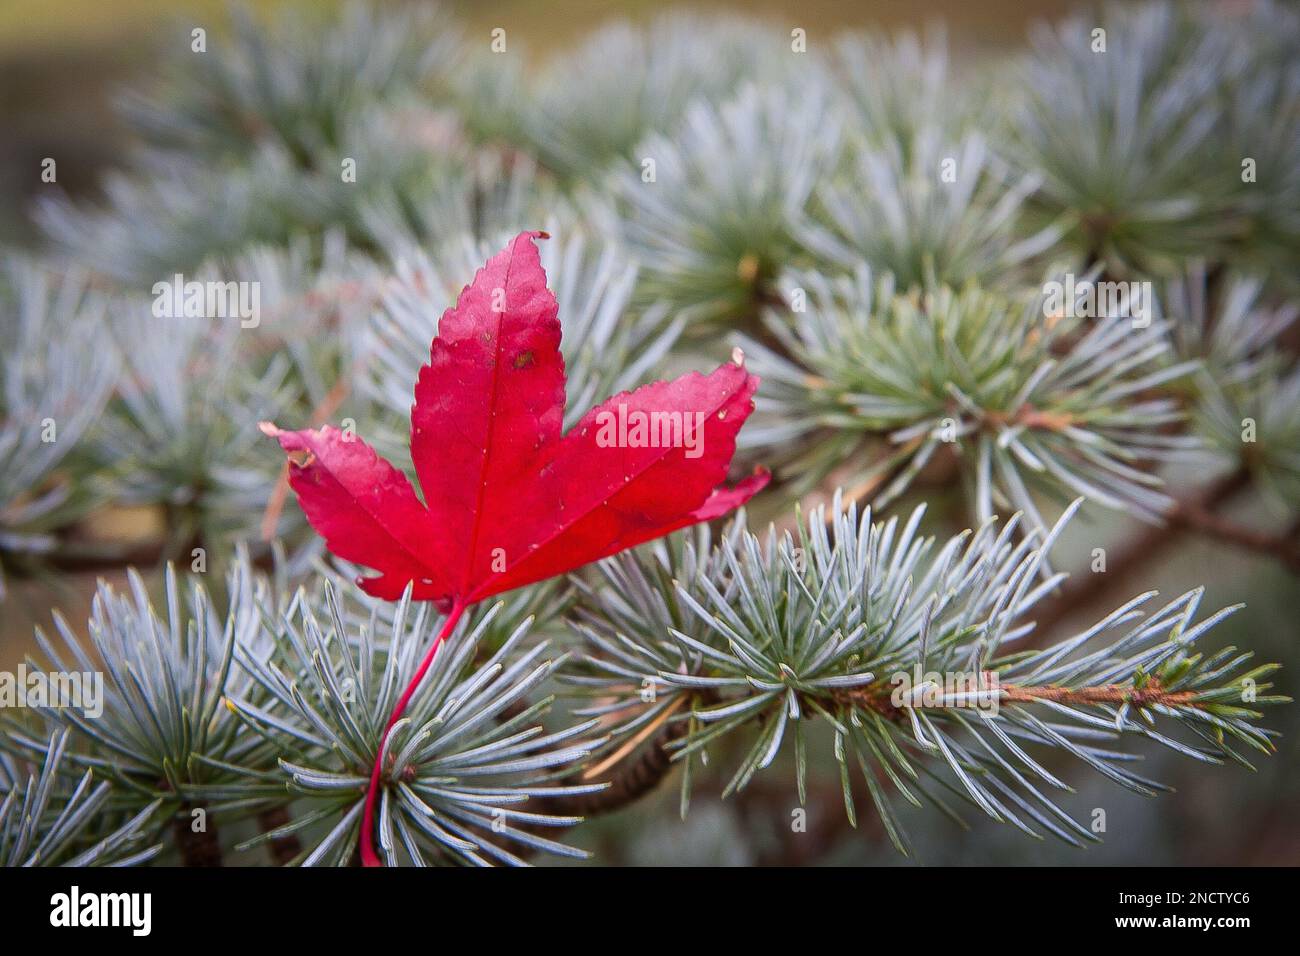 Single red maple leaf on a silver pine branch Stock Photo